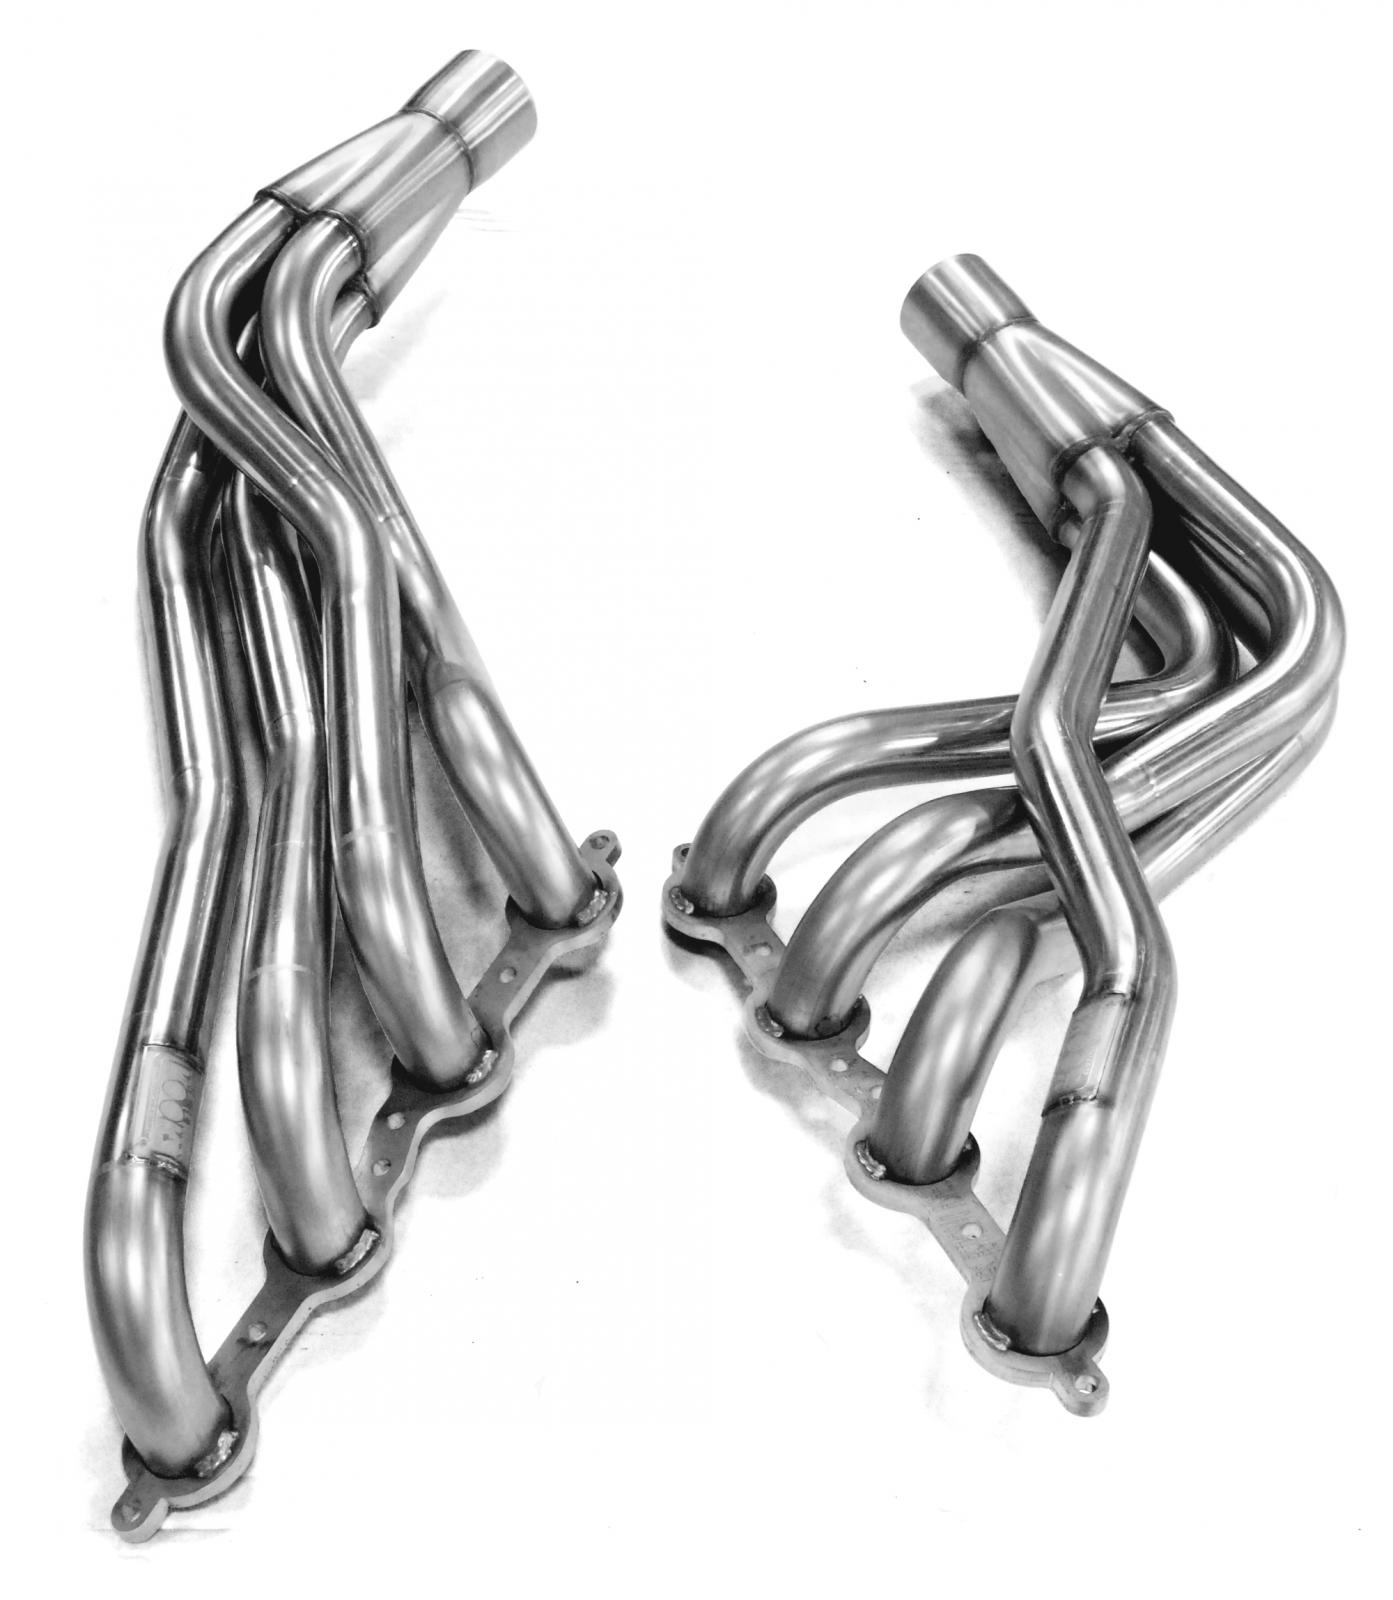 Stainless Steel Headers Race Version-Non Emission 2 x 3" Long Tube O2 Fittings Only w/Merge Collectors